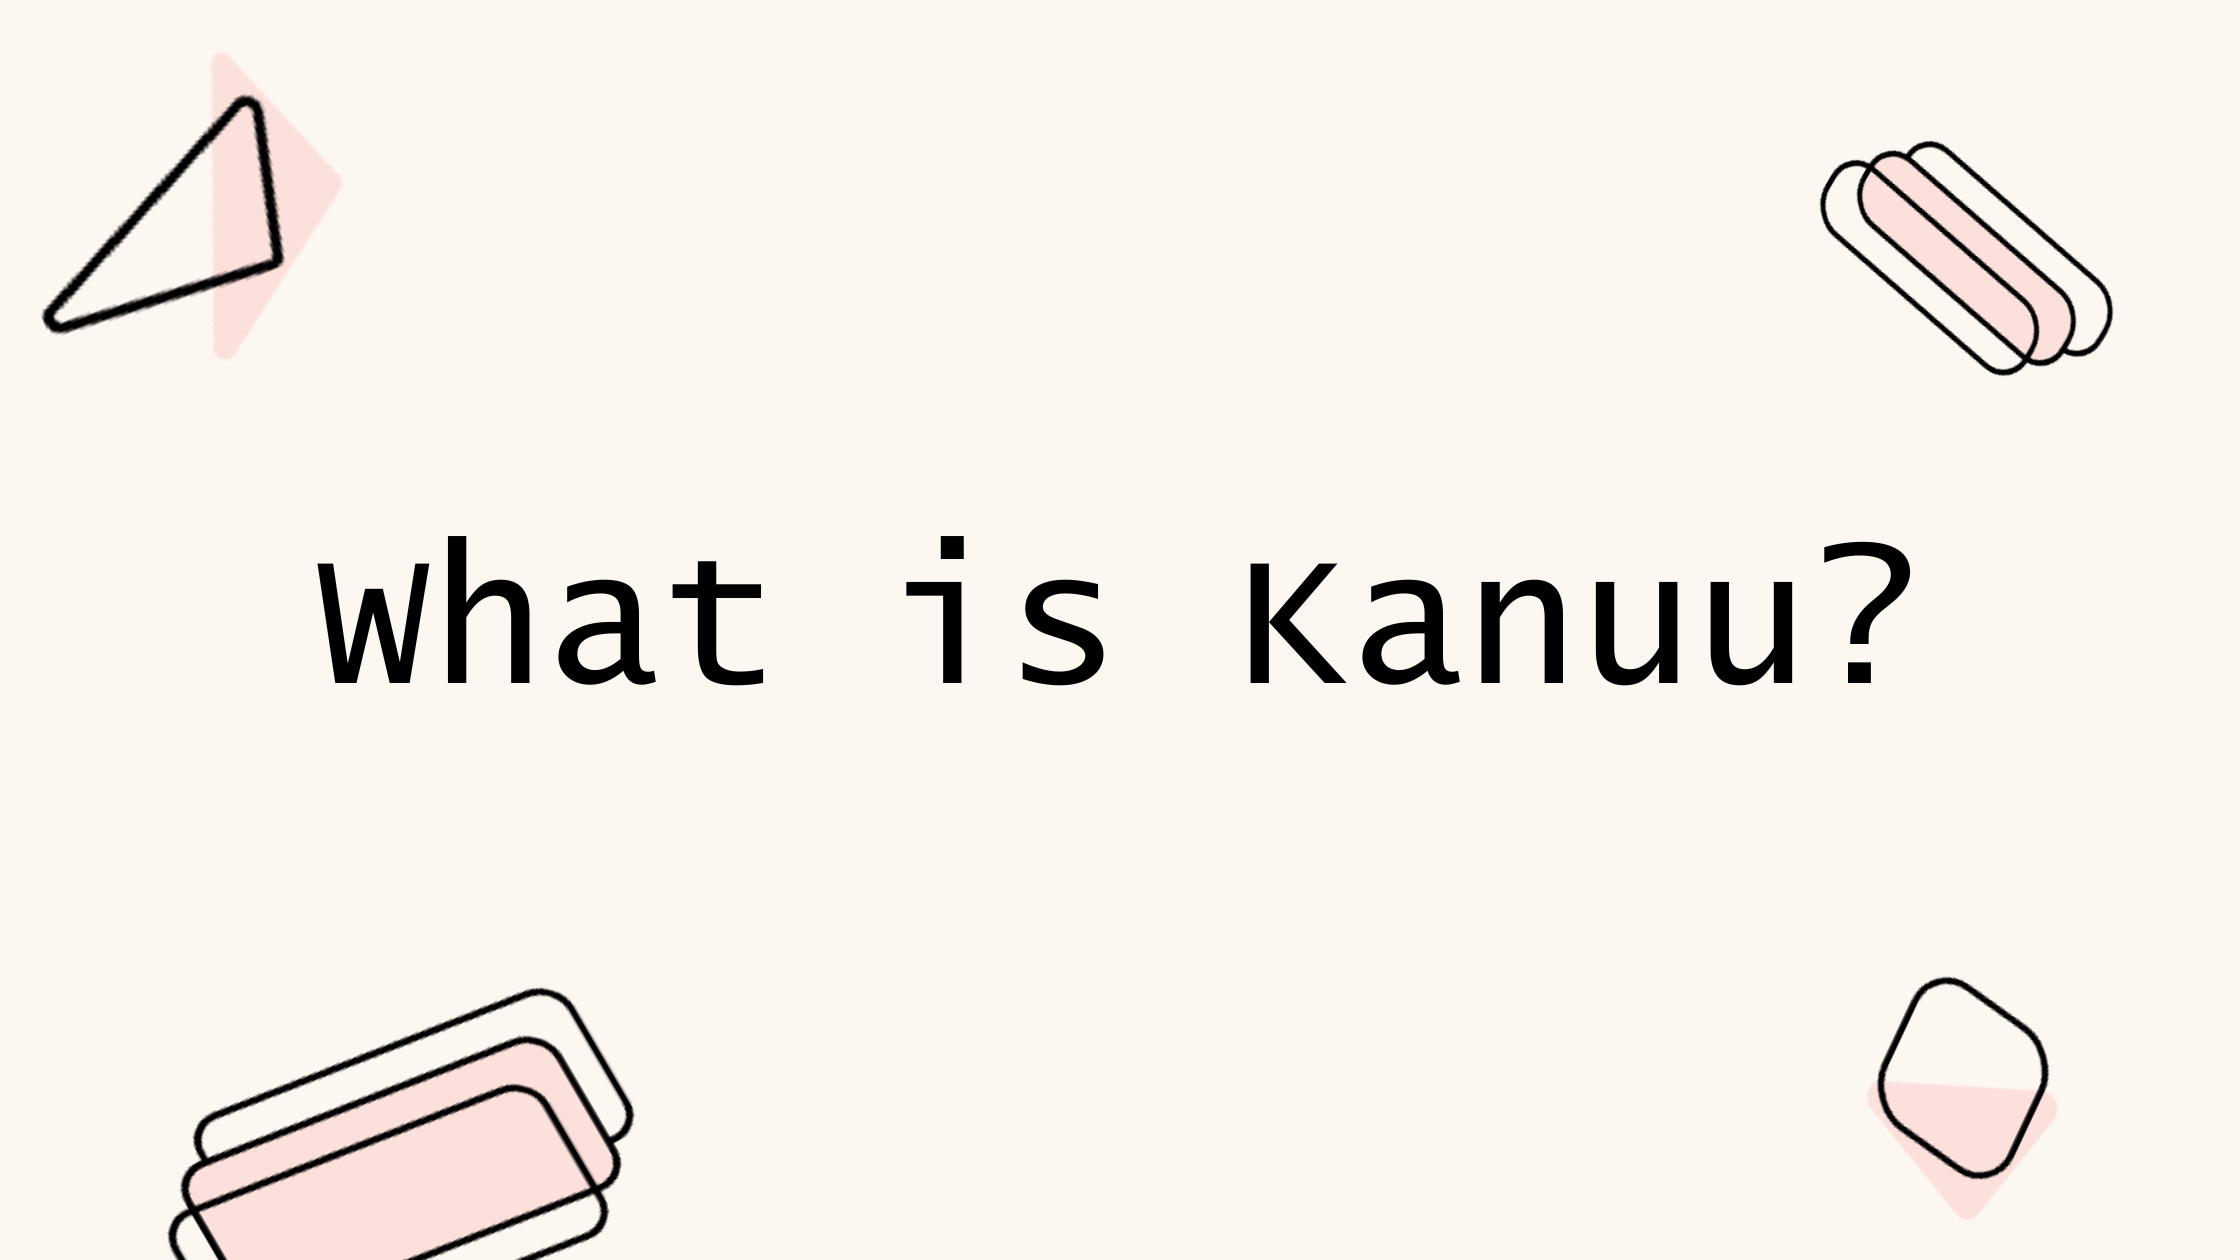 Text reading 'What is Kanuu' surrounded by Kanuu - the billing/subscription UI - styled shapes.